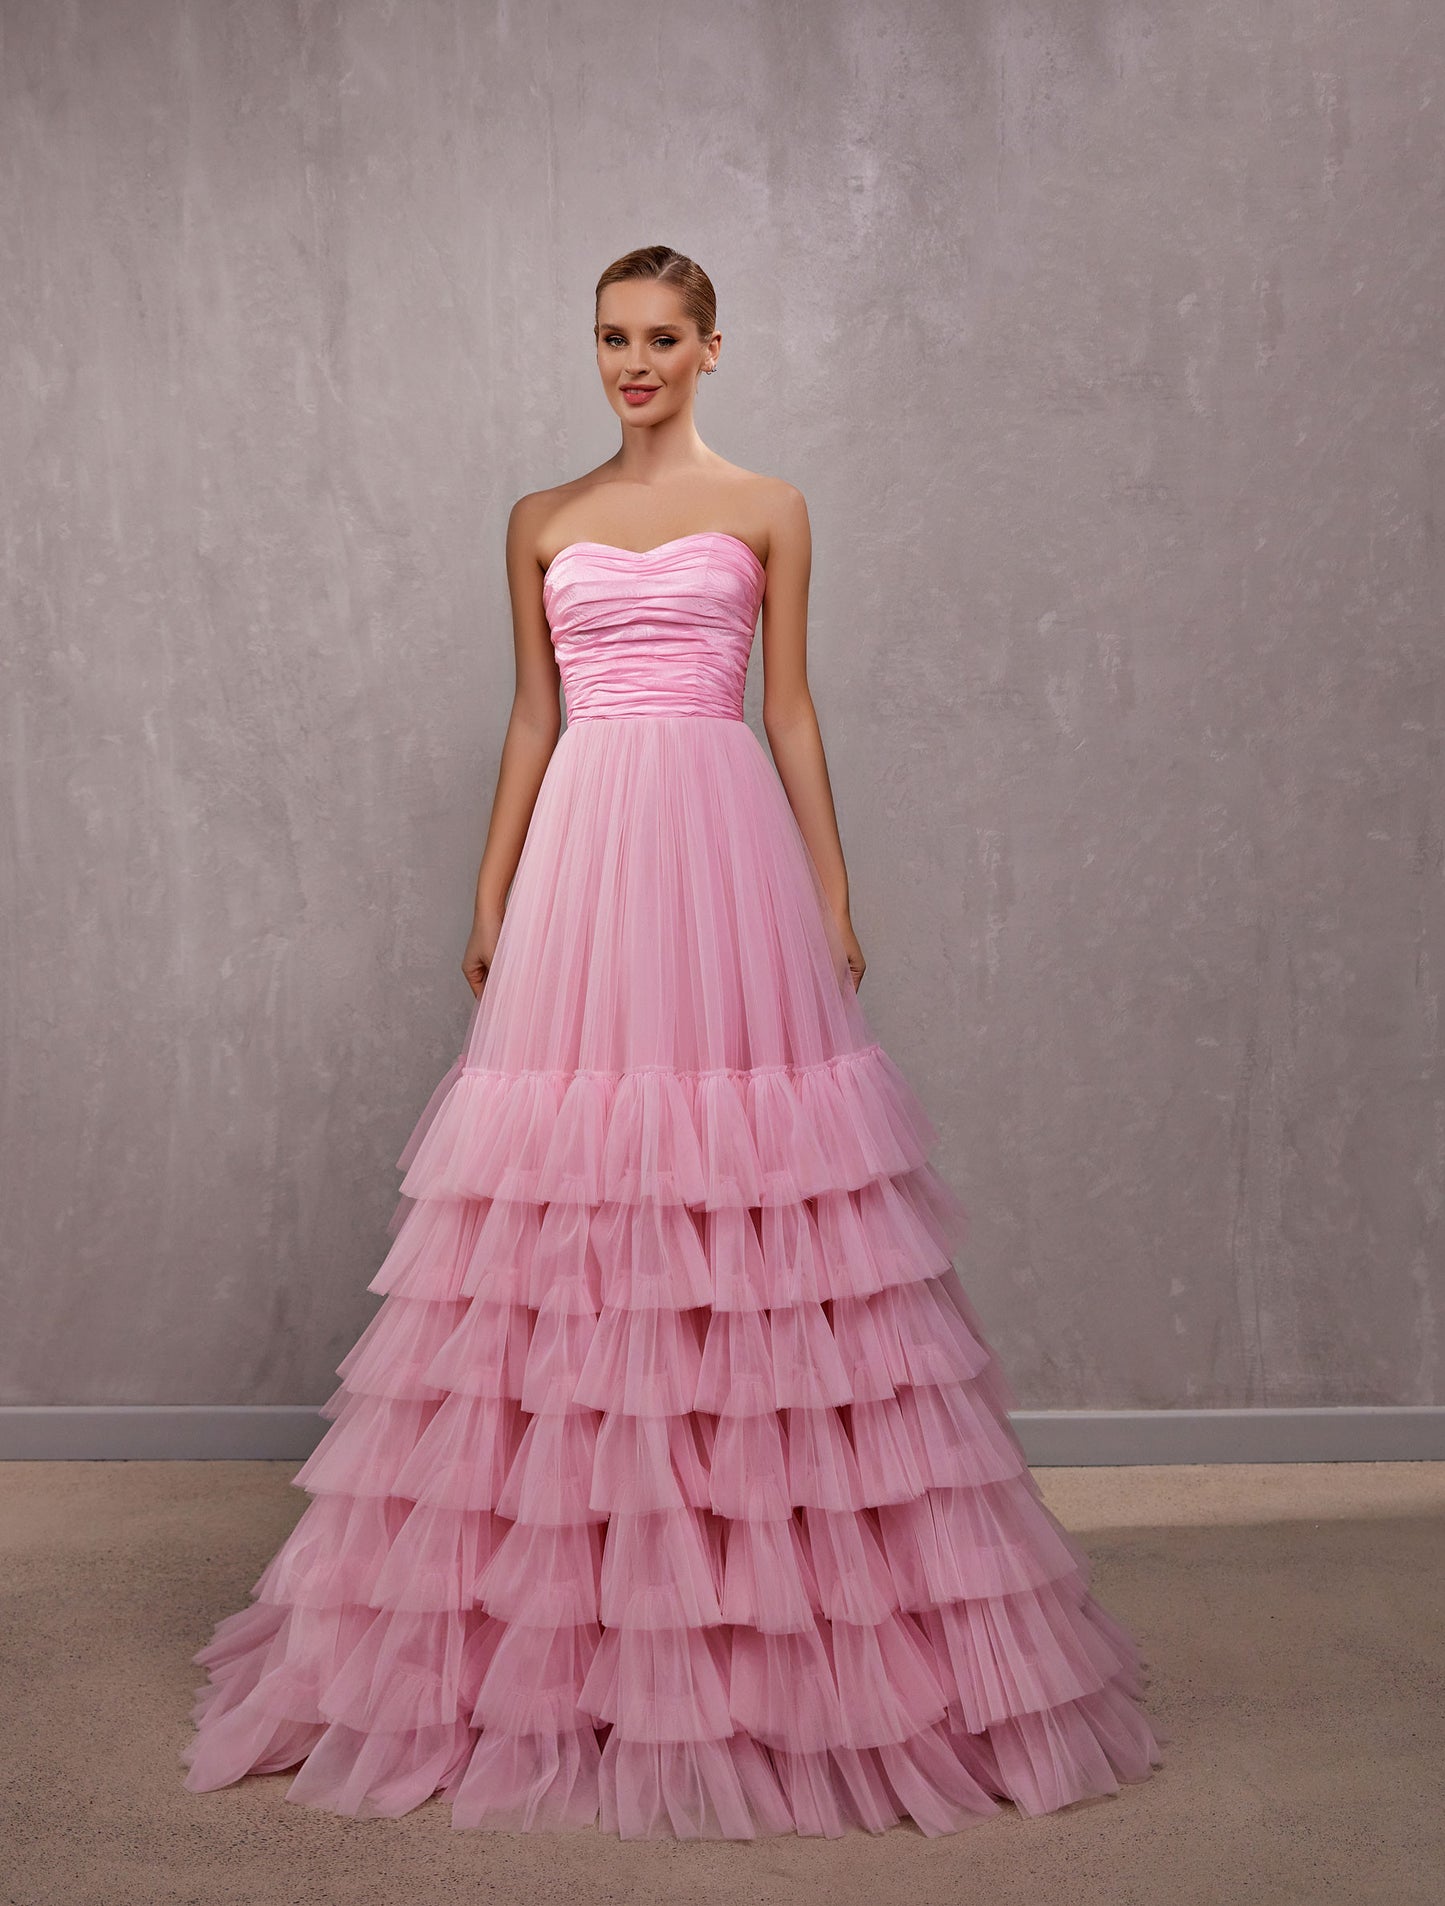 Pink Tulle Maxi Sleeveless A-Line Ruffle Prom Dress Pink 